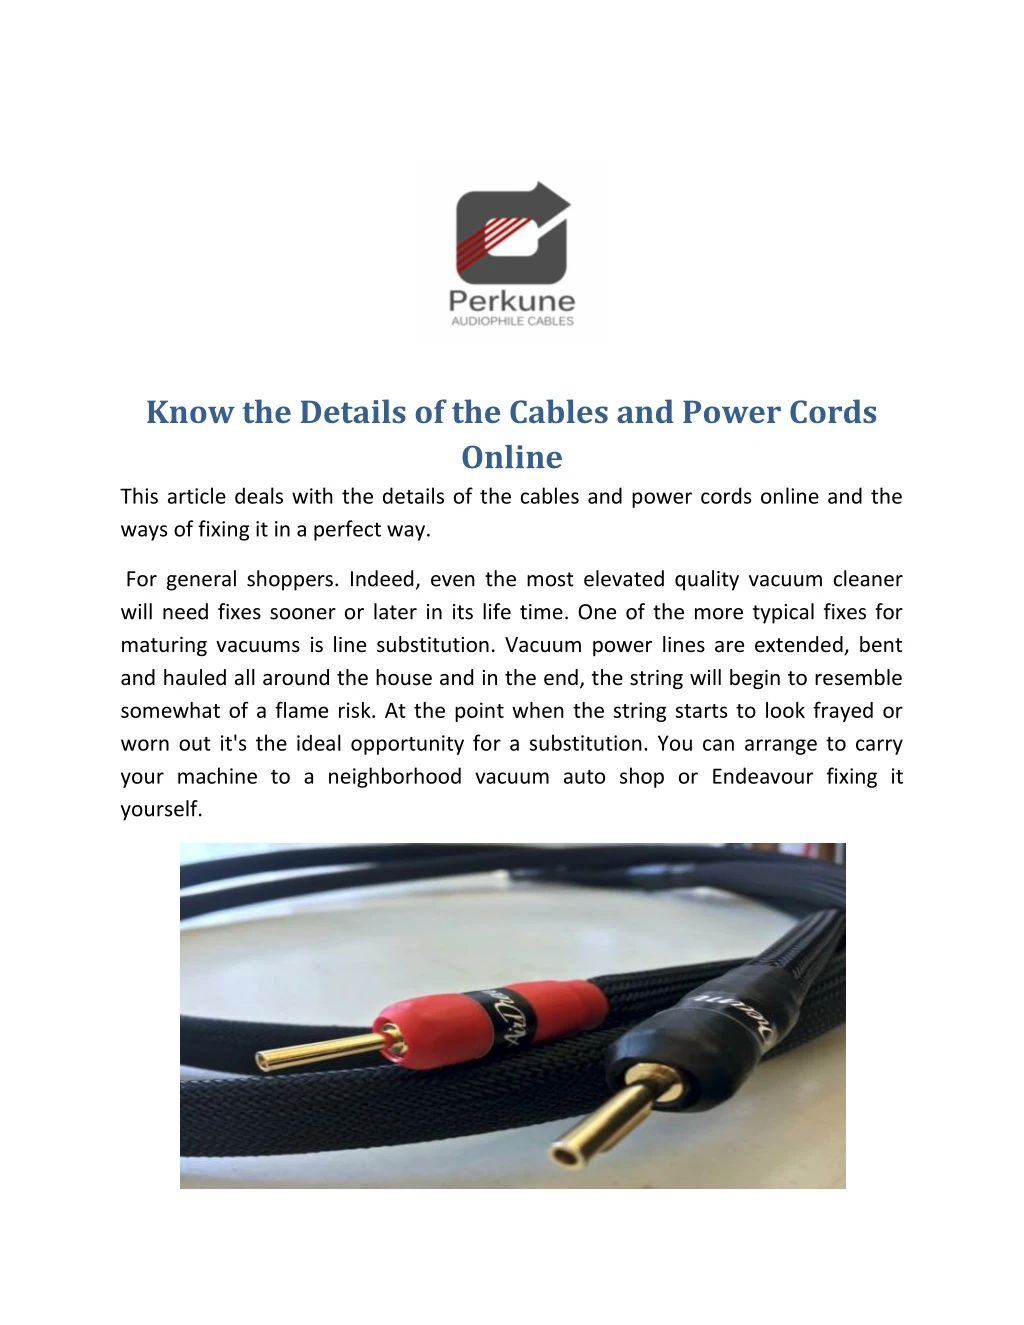 know the details of the cables and power cords